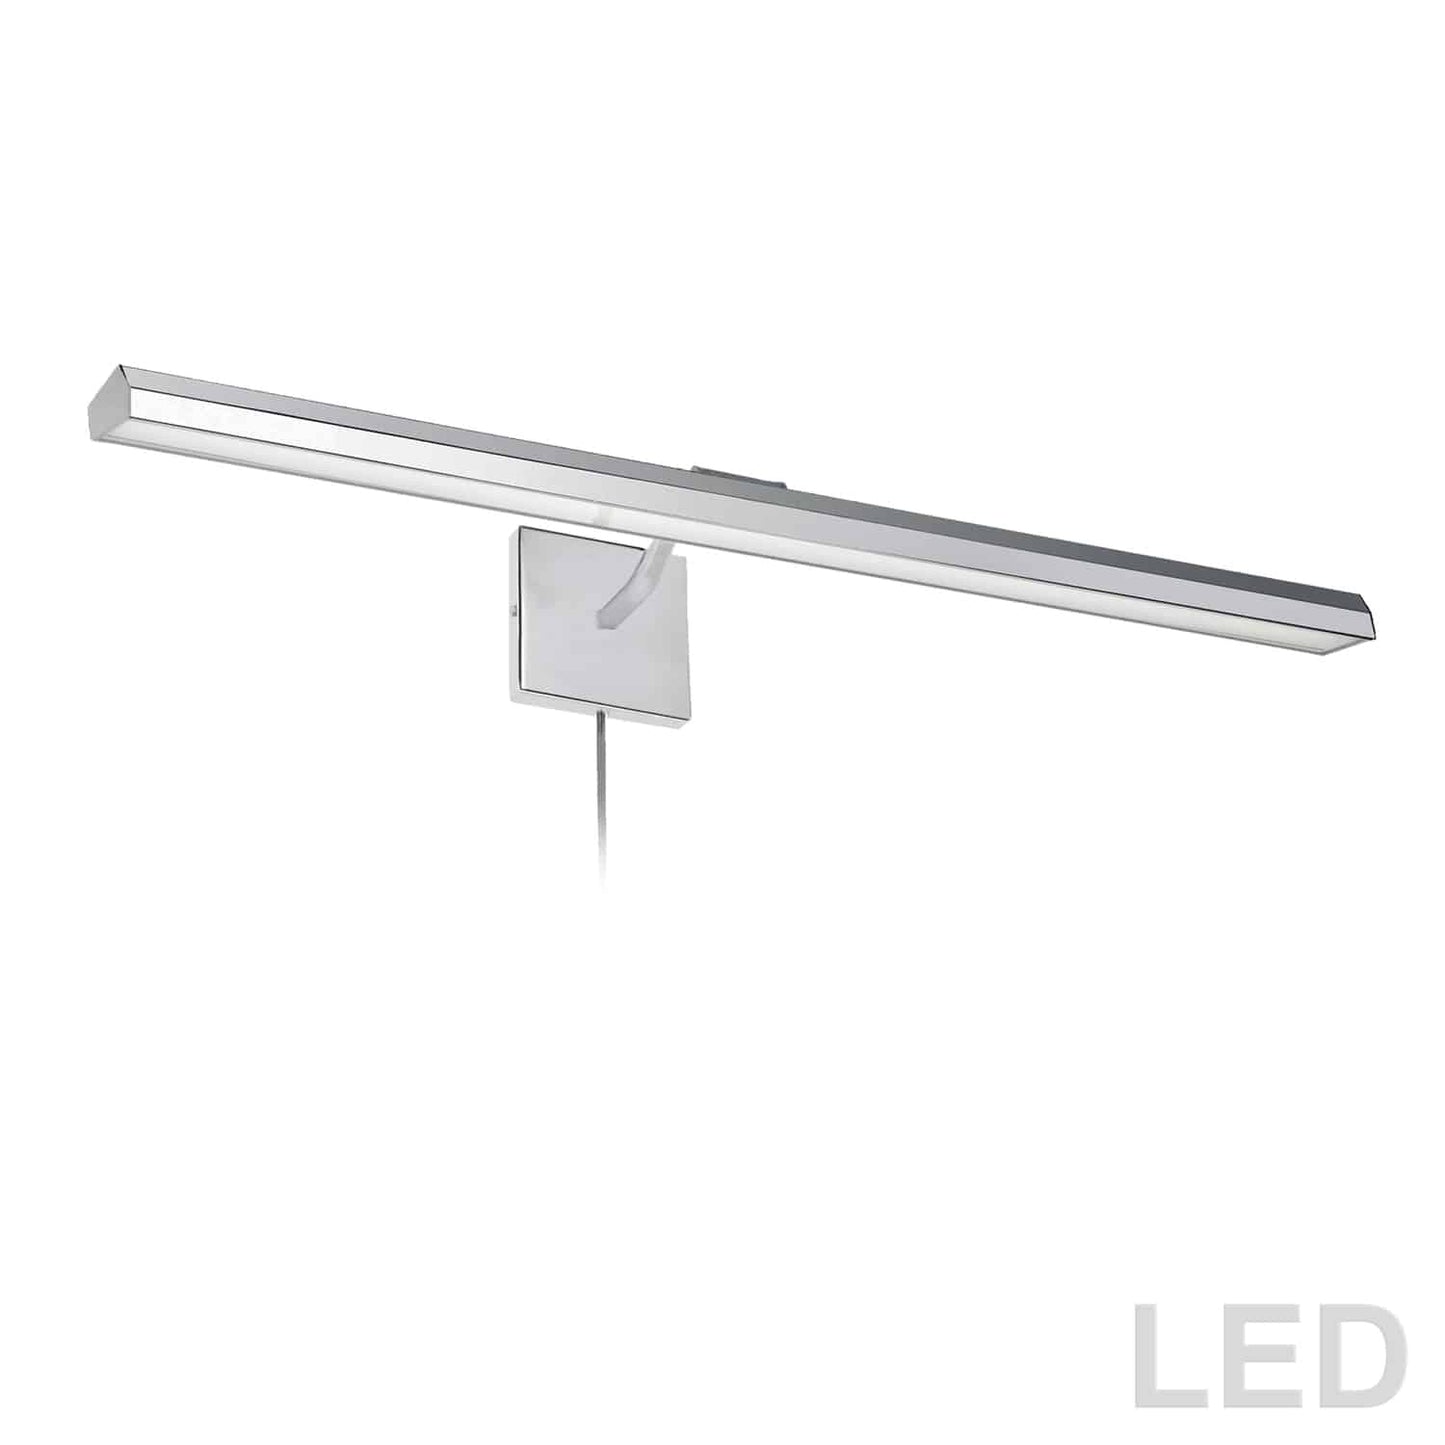 Dainolite PIC222-32LED-PC 40W 32" Picture Light, Polished Chrome with Frosted Glass Diffuser